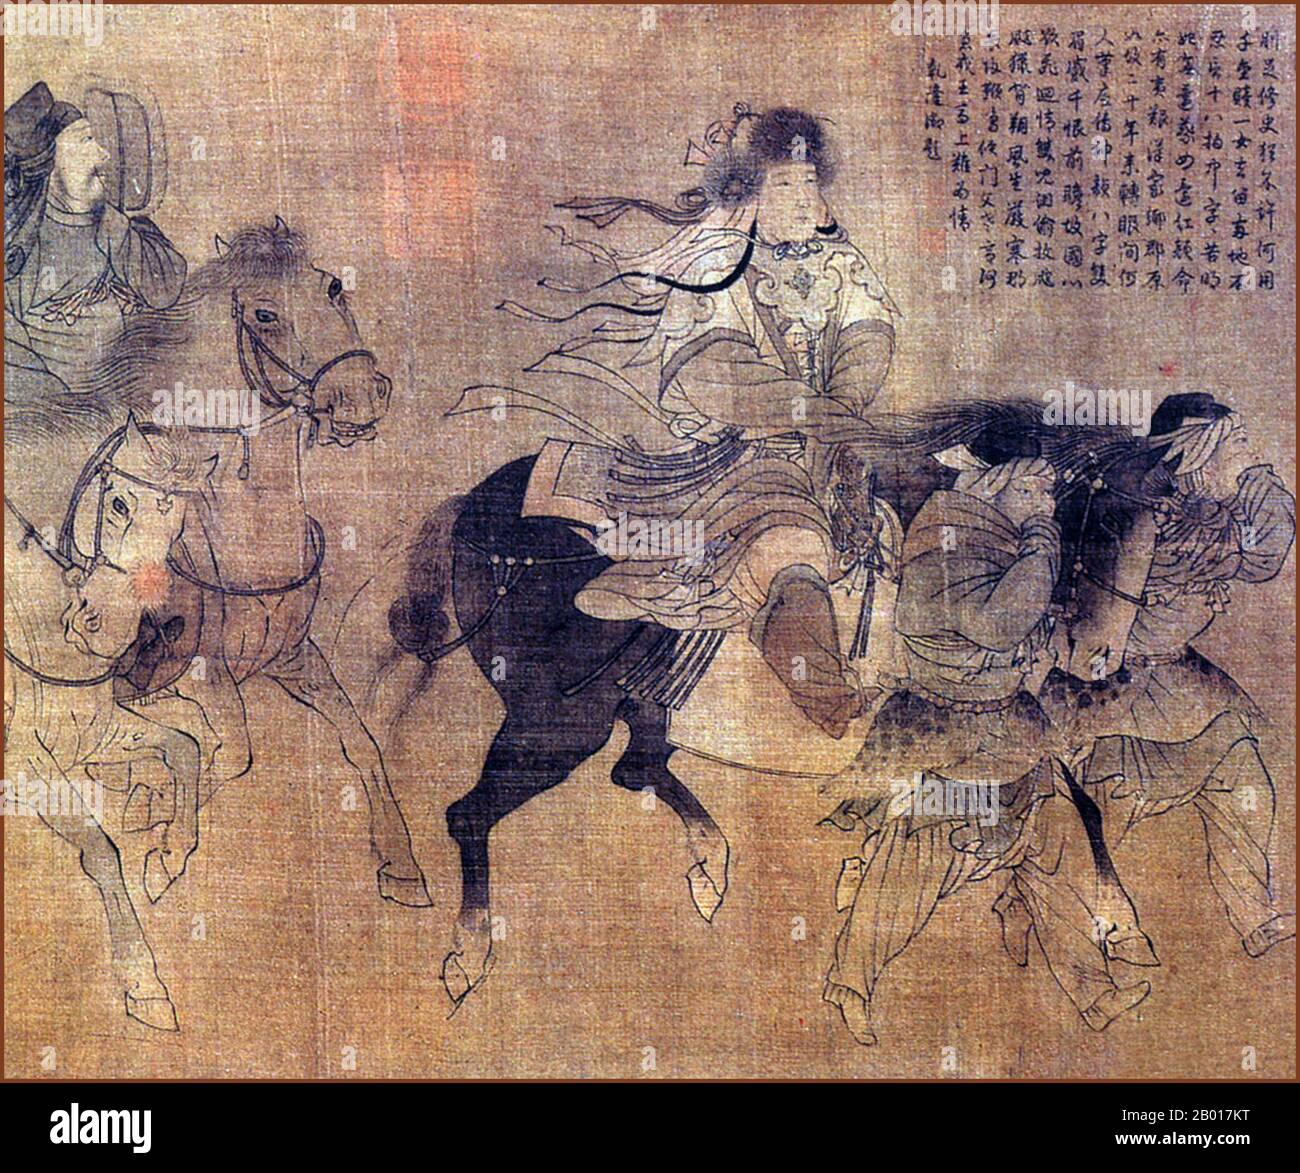 China: 'Cai Wenji on Horseback among the Xiongnu'. Detail of handscroll painting, Southern Song Dynasty (1127-1279).  Cai Wenji was born shortly before 178 CE in what is now Qi County, Kaifeng, Henan. In 195, the chaos after Chancellor Dong Zhuo's death brought Xiongnu nomads into the Chinese capital and Cai Wenji was taken captive to the northern lands. During her captivity, she became the wife of the Xiongnu chieftain Liu Bao and bore him two sons. It was not until twelve years later that Cao Cao, the new Chancellor of Han, ransomed her in her father's name. Stock Photo